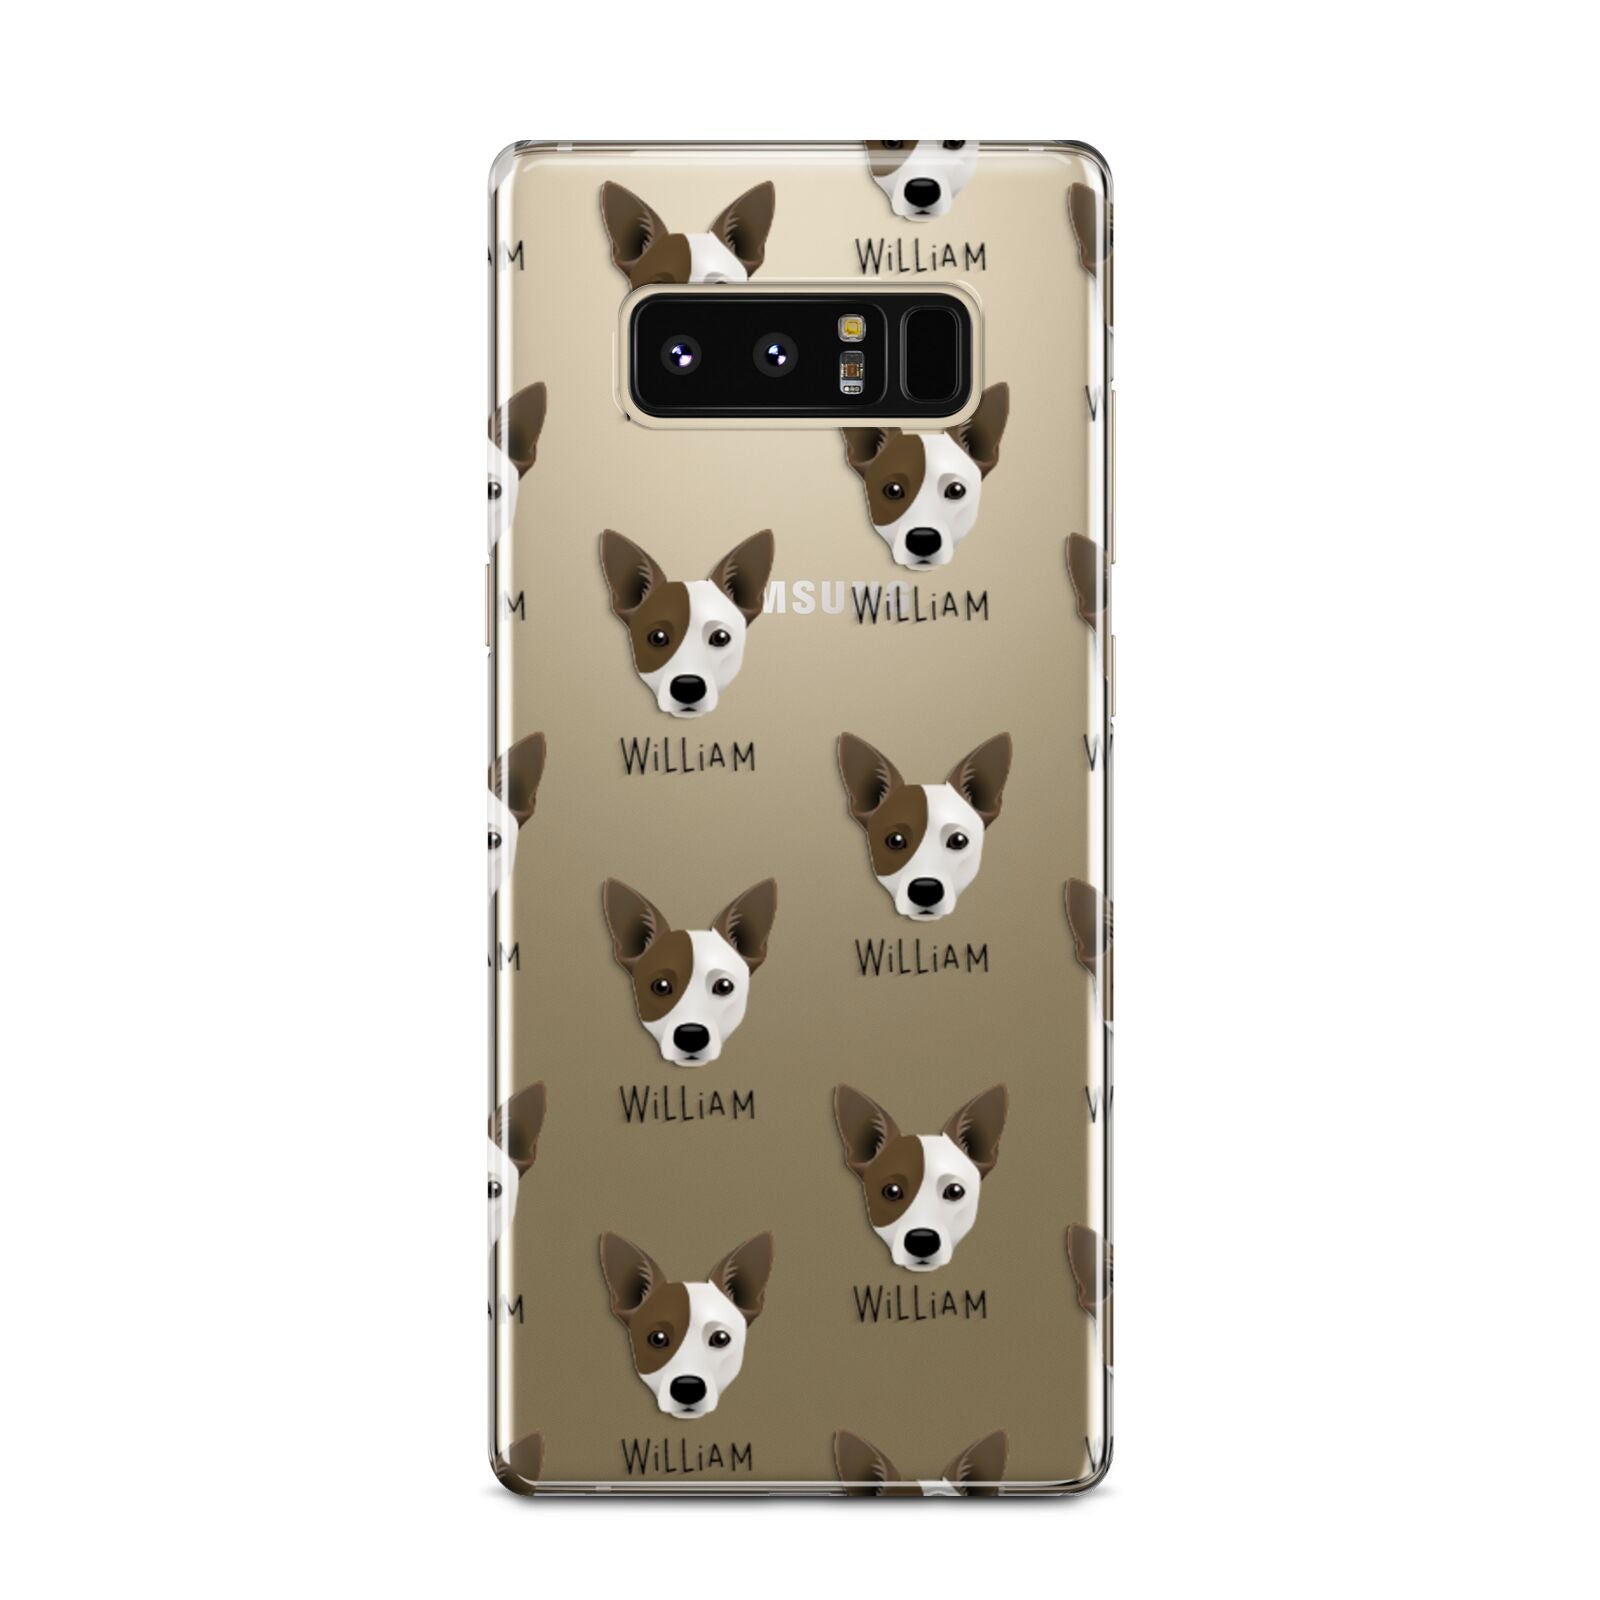 Cojack Icon with Name Samsung Galaxy Note 8 Case